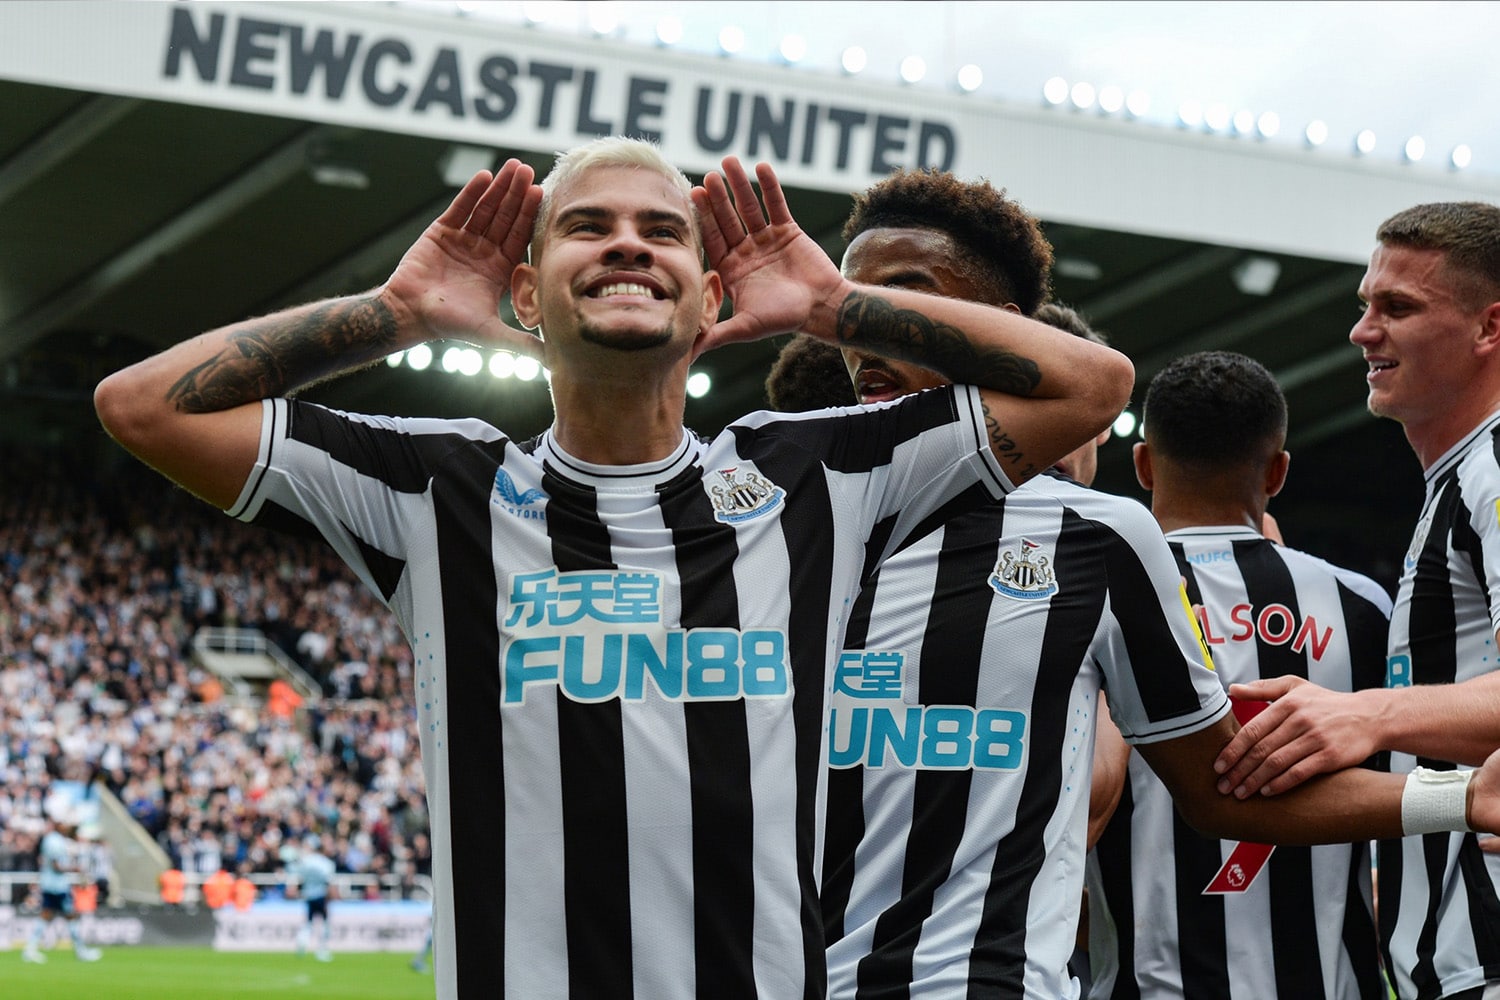 Newcastle United has added a new front-of-shirt sponsor.